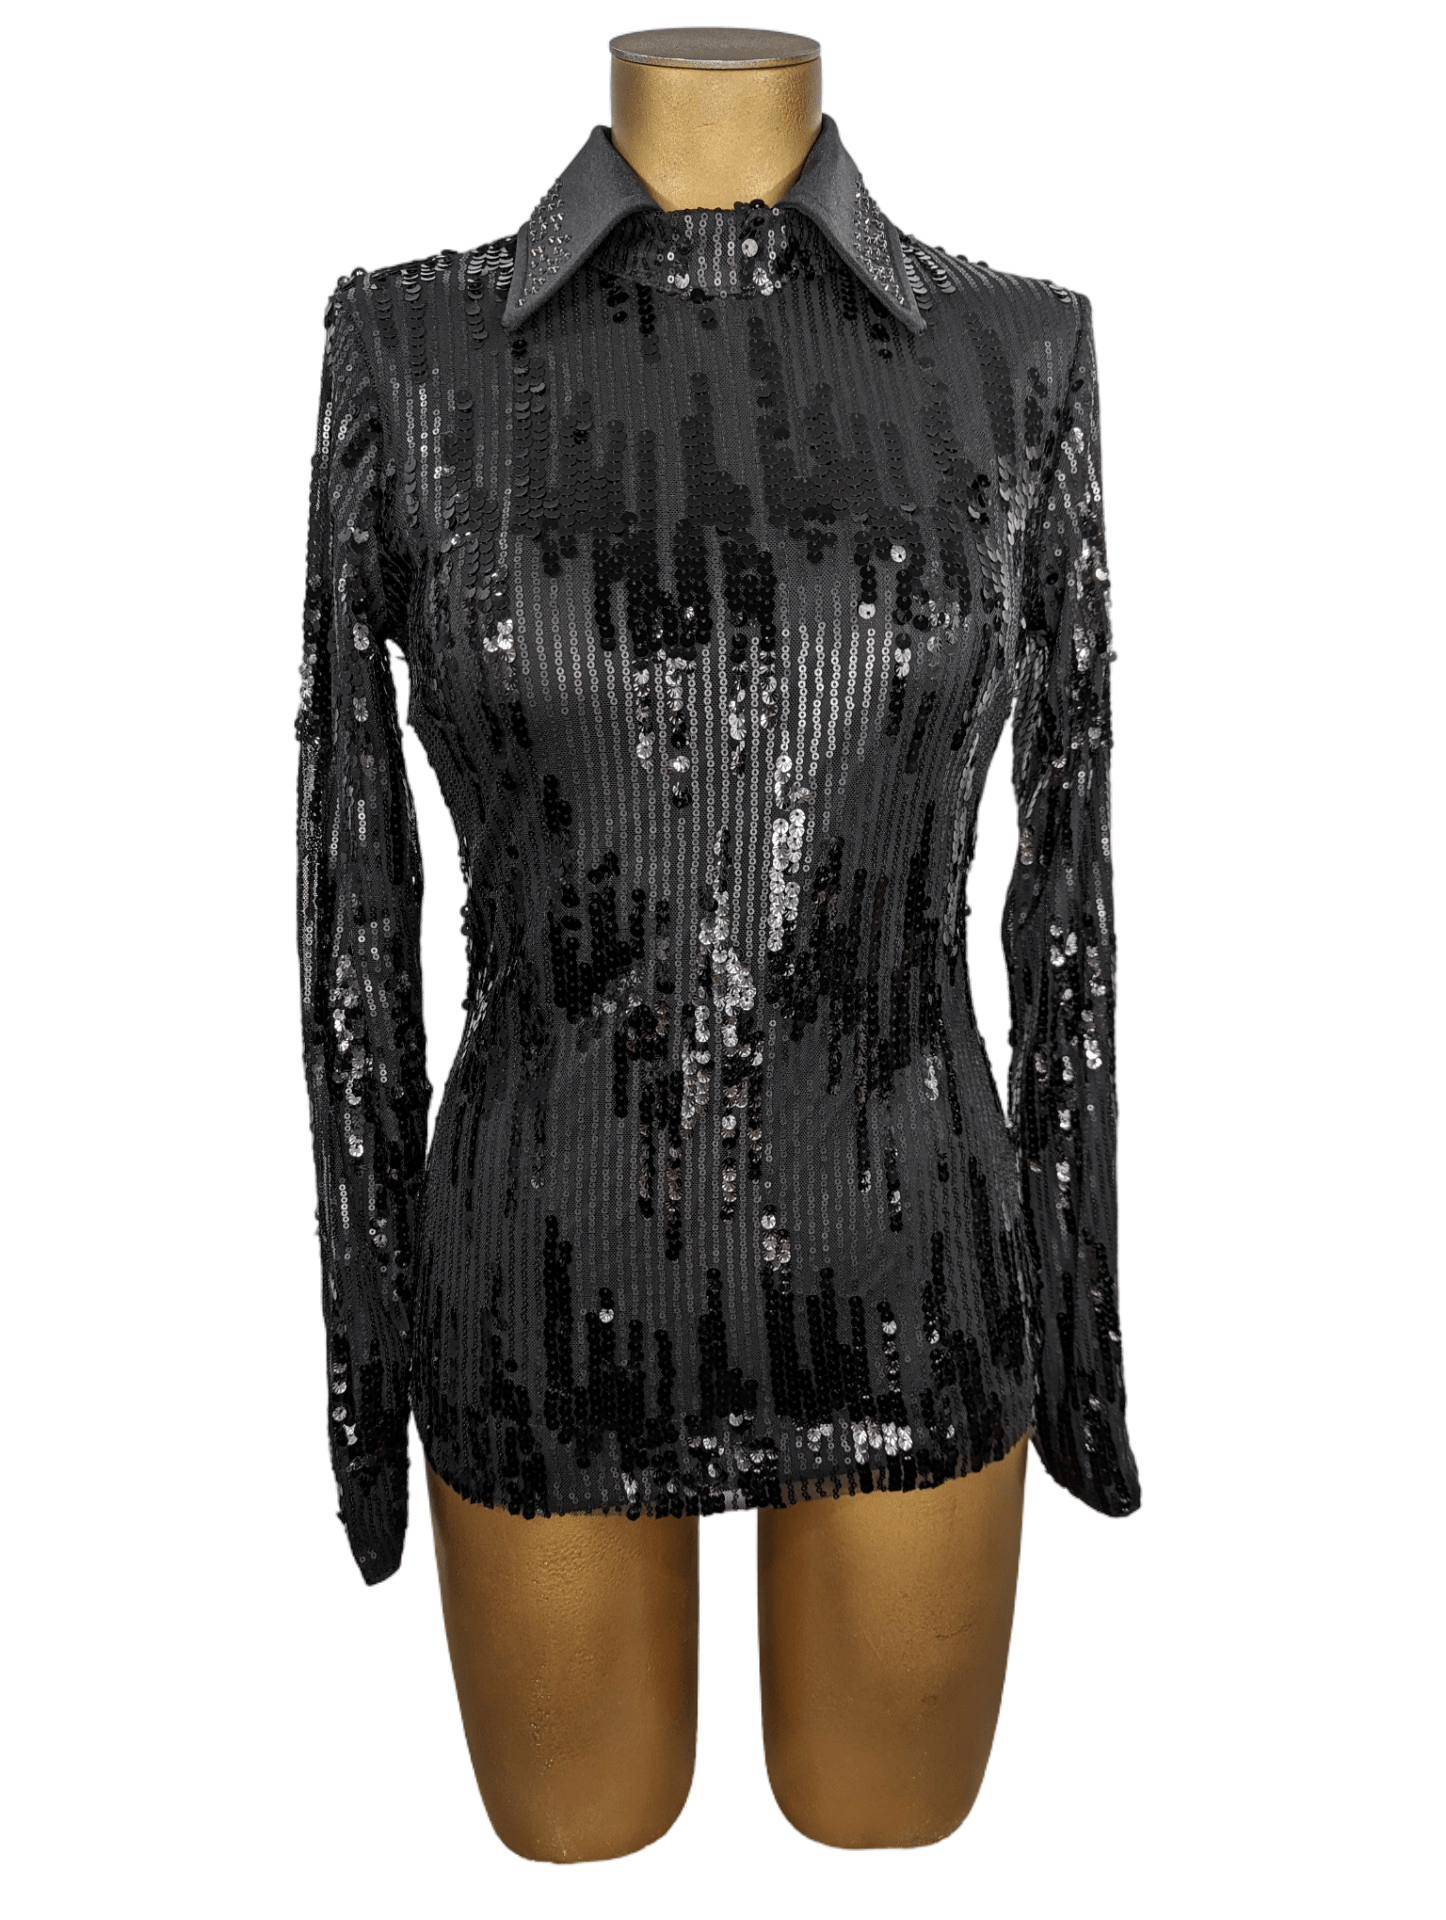 sparkle-ridge-womens-western-wear-affordable-show-clothes-horse-shirts-with-bling-rodeo-bodysuit-jet-black-sequin-heiress-front.png (Copy) (Copy)